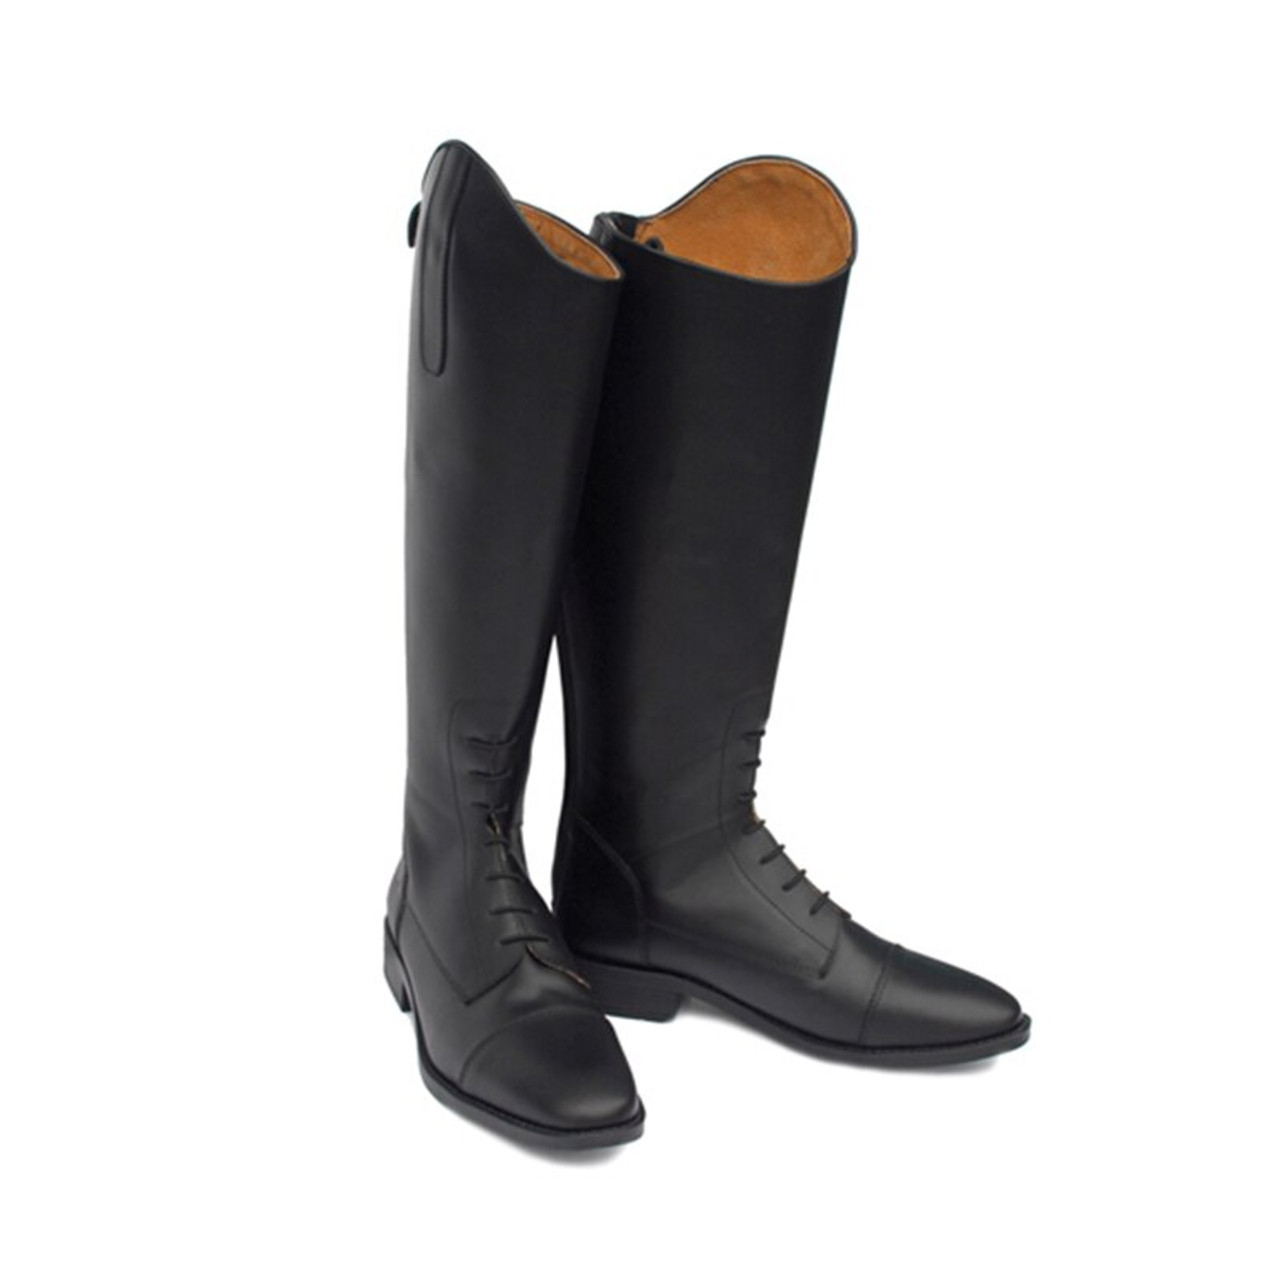 Rhinegold Young Rider Elite Luxus Soft Leather Riding Boot